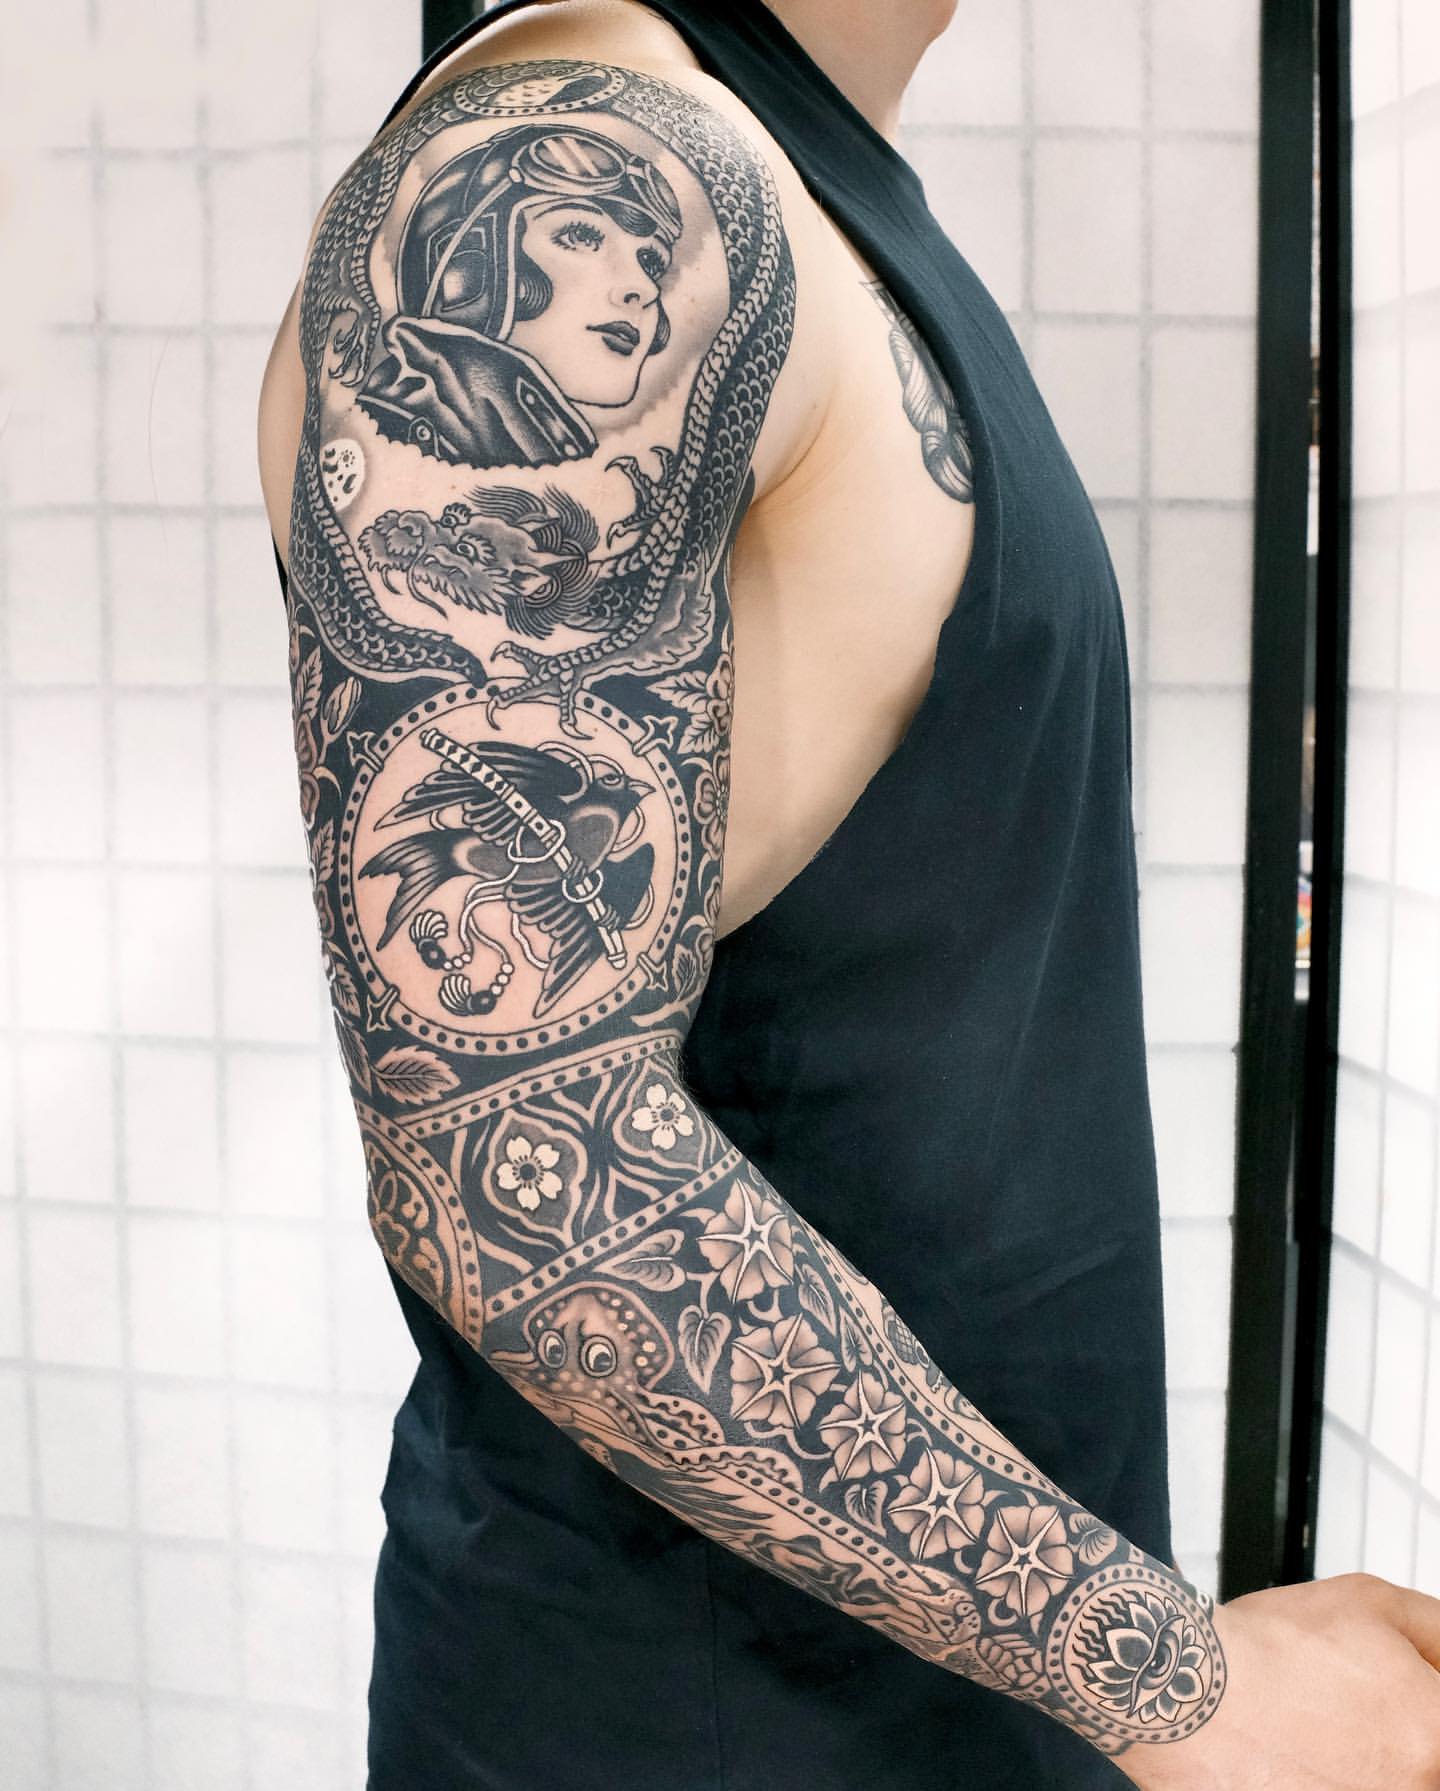 Trends In Contemporary Tattoo Culture: Sleeve Vs Patchwork | Homegrown